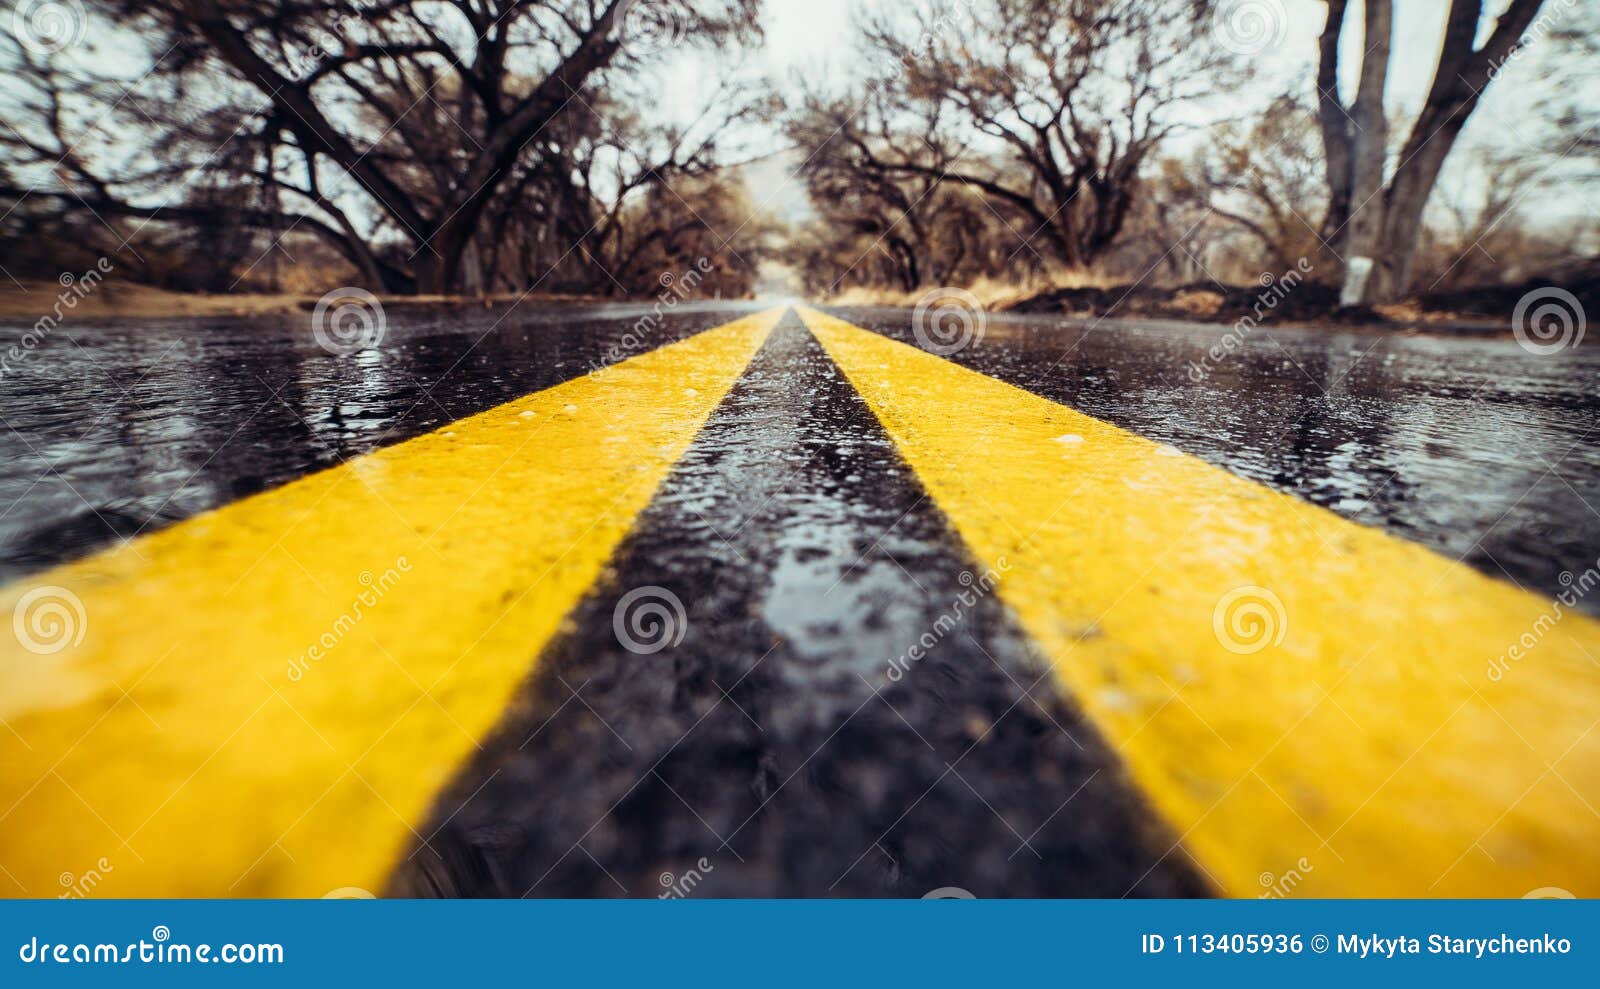 closeup photo of yellow marking lane on wet asphalt road in forest.